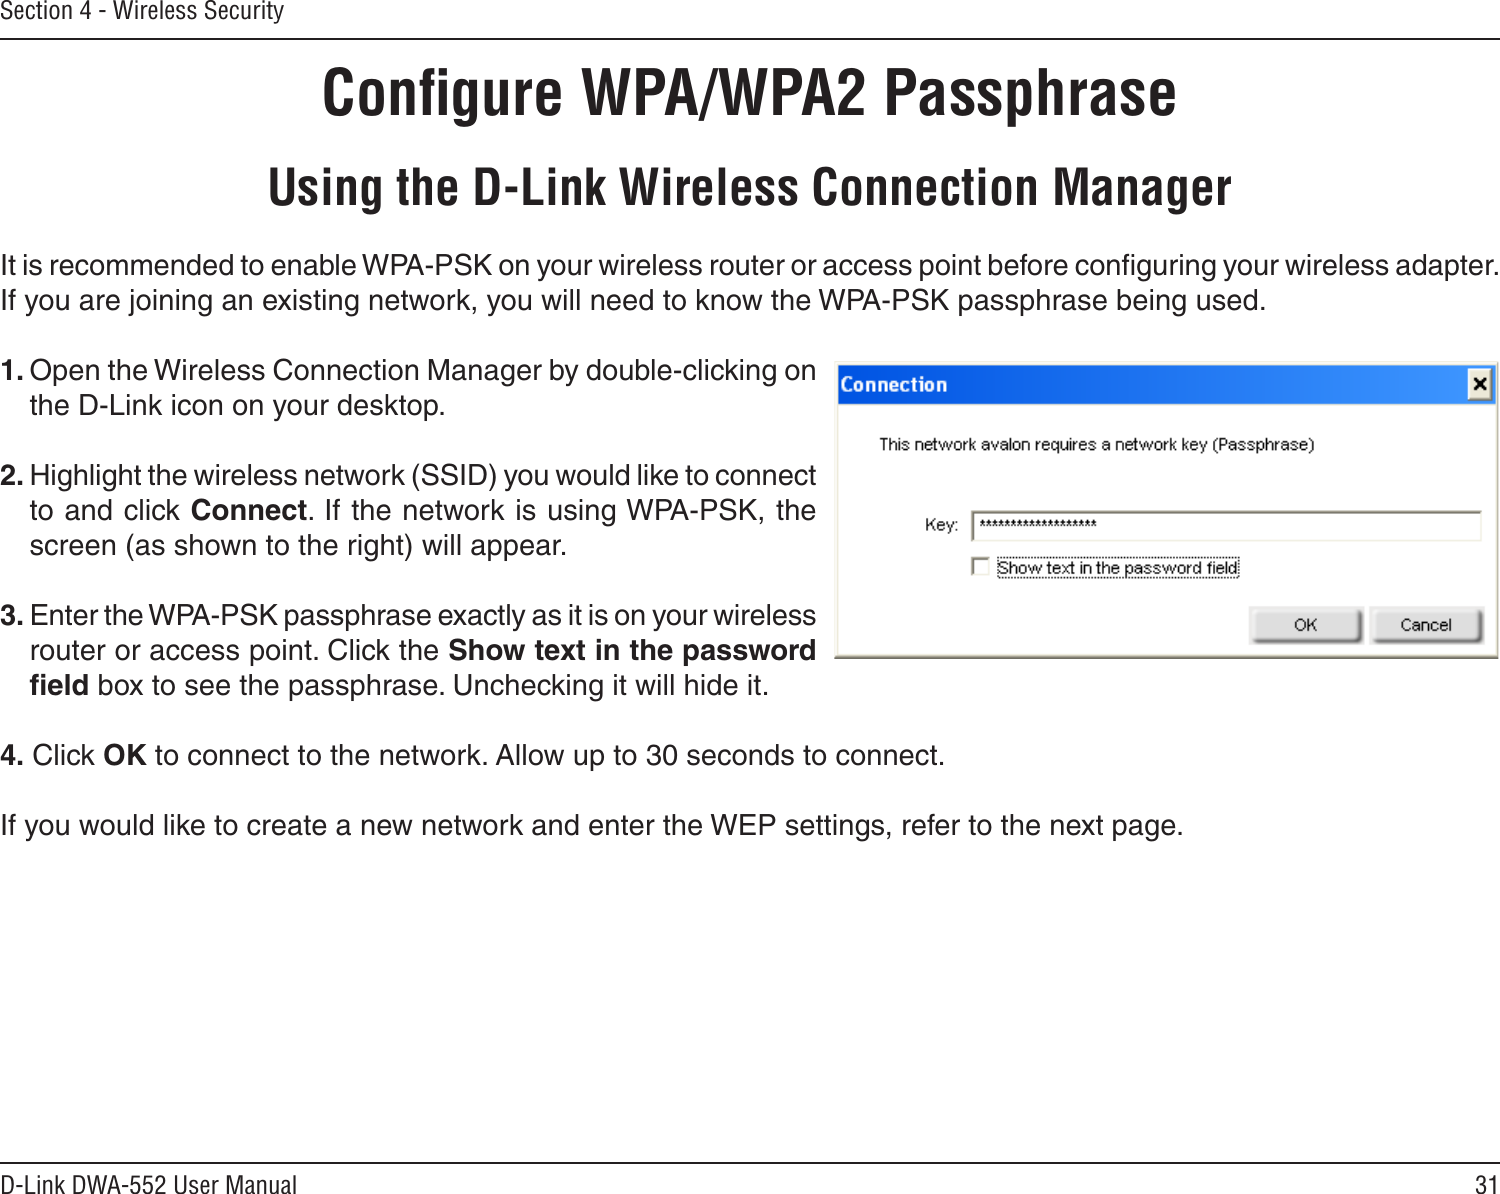 31D-Link DWA-552 User ManualSection 4 - Wireless SecurityConﬁgure WPA/WPA2 PassphraseUsing the D-Link Wireless Connection ManagerIt is recommended to enable WPA-PSK on your wireless router or access point before conﬁguring your wireless adapter. If you are joining an existing network, you will need to know the WPA-PSK passphrase being used.1. Open the Wireless Connection Manager by double-clicking on the D-Link icon on your desktop. 2. Highlight the wireless network (SSID) you would like to connect to and click Connect. If the network is using WPA-PSK, the screen (as shown to the right) will appear. 3. Enter the WPA-PSK passphrase exactly as it is on your wireless router or access point. Click the Show text in the password ﬁeld box to see the passphrase. Unchecking it will hide it.4. Click OK to connect to the network. Allow up to 30 seconds to connect.If you would like to create a new network and enter the WEP settings, refer to the next page.